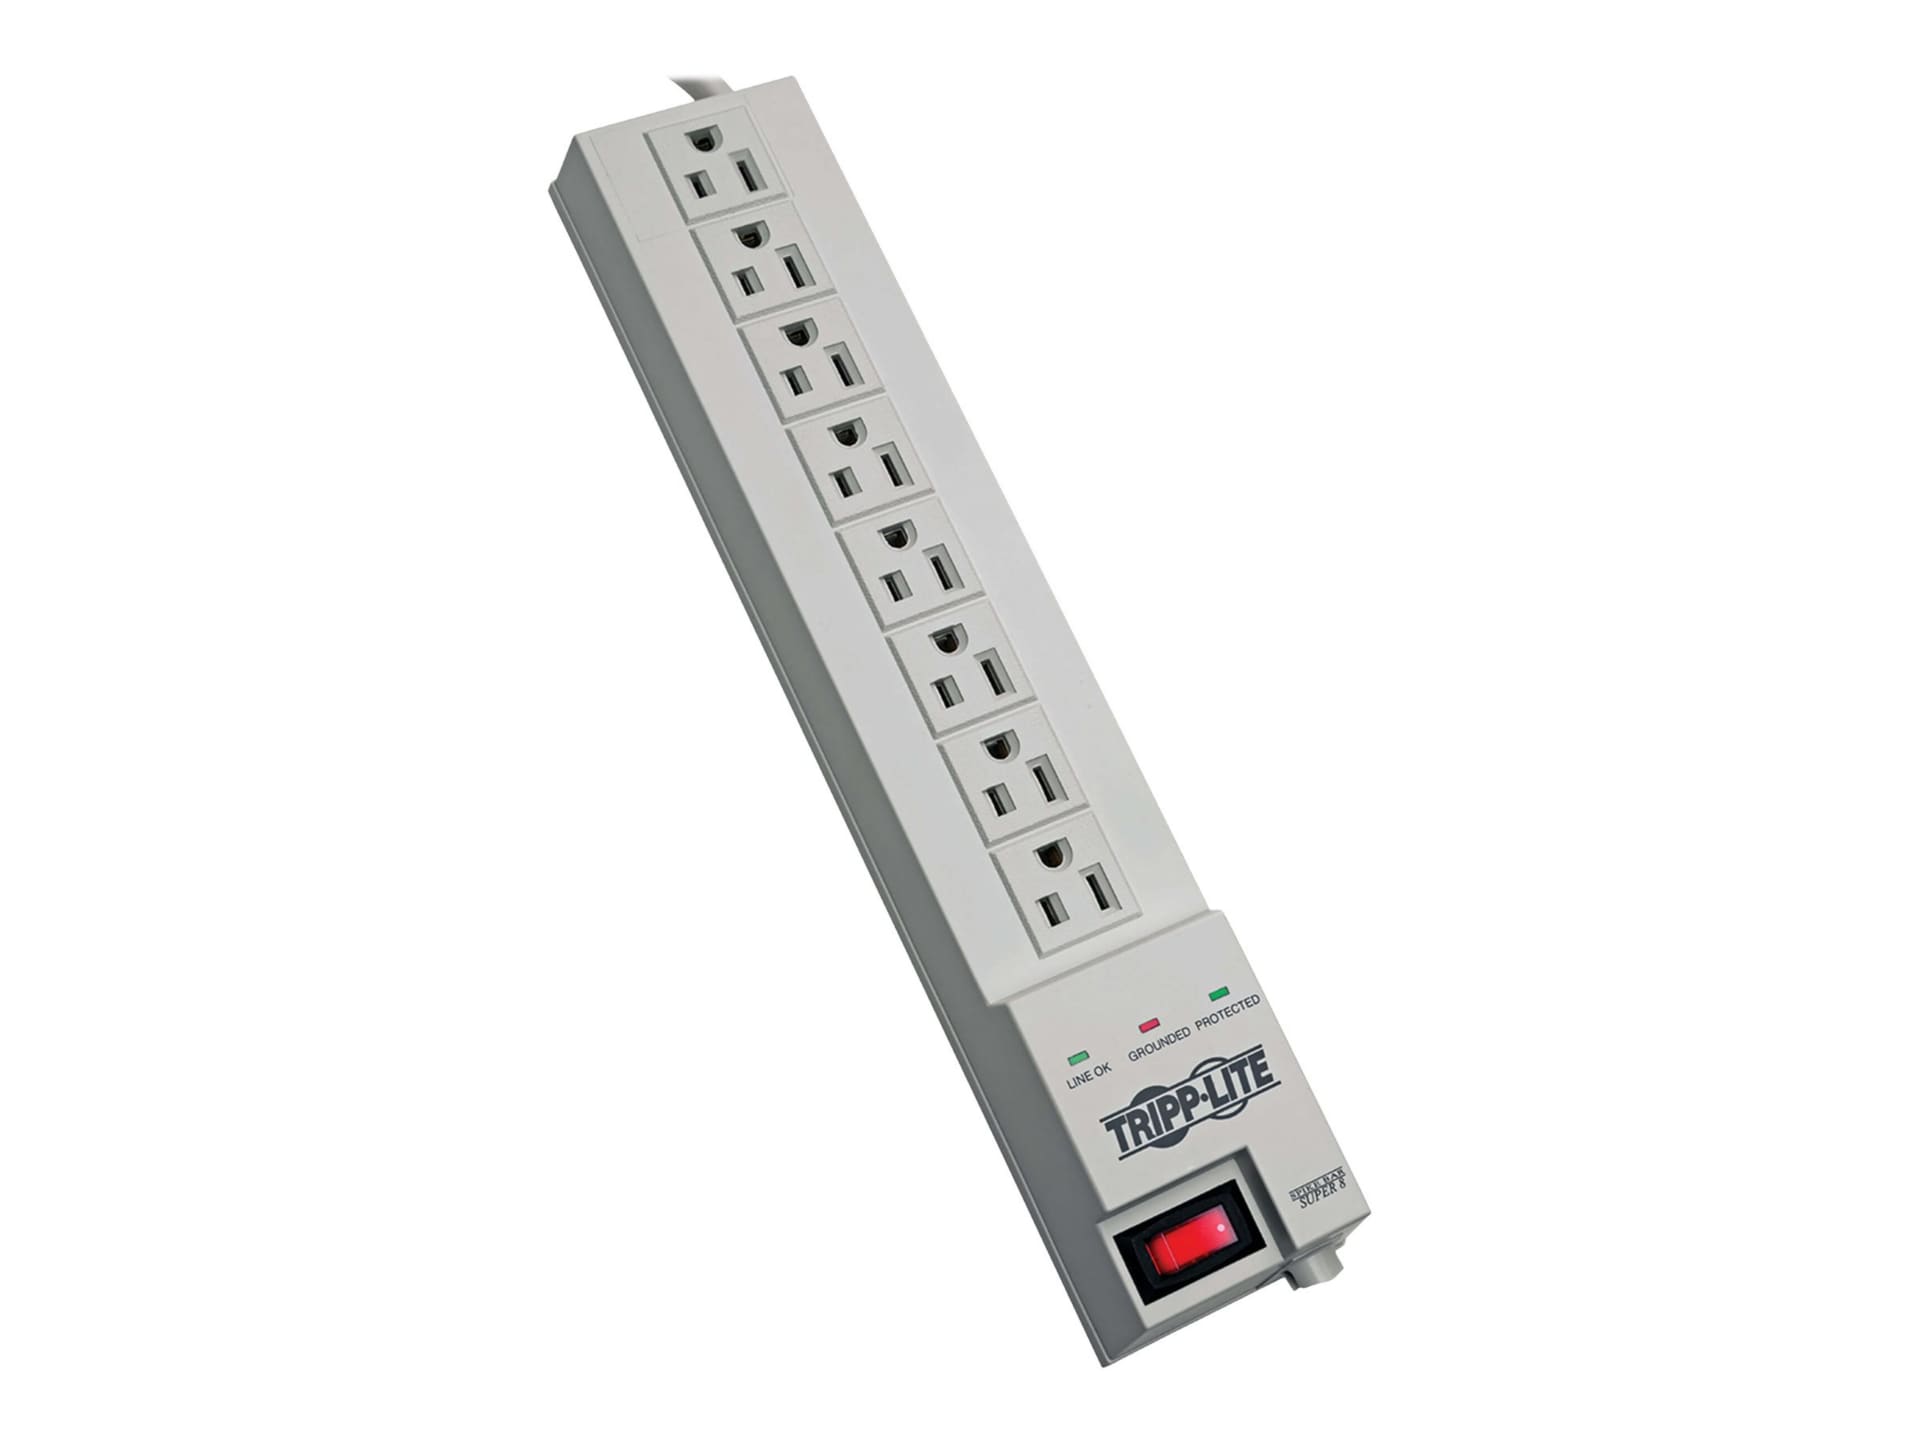 Tripp Lite Surge Protector Power Strip 120V 8 Outlet 8' Cord 1080 Joule - surge protector